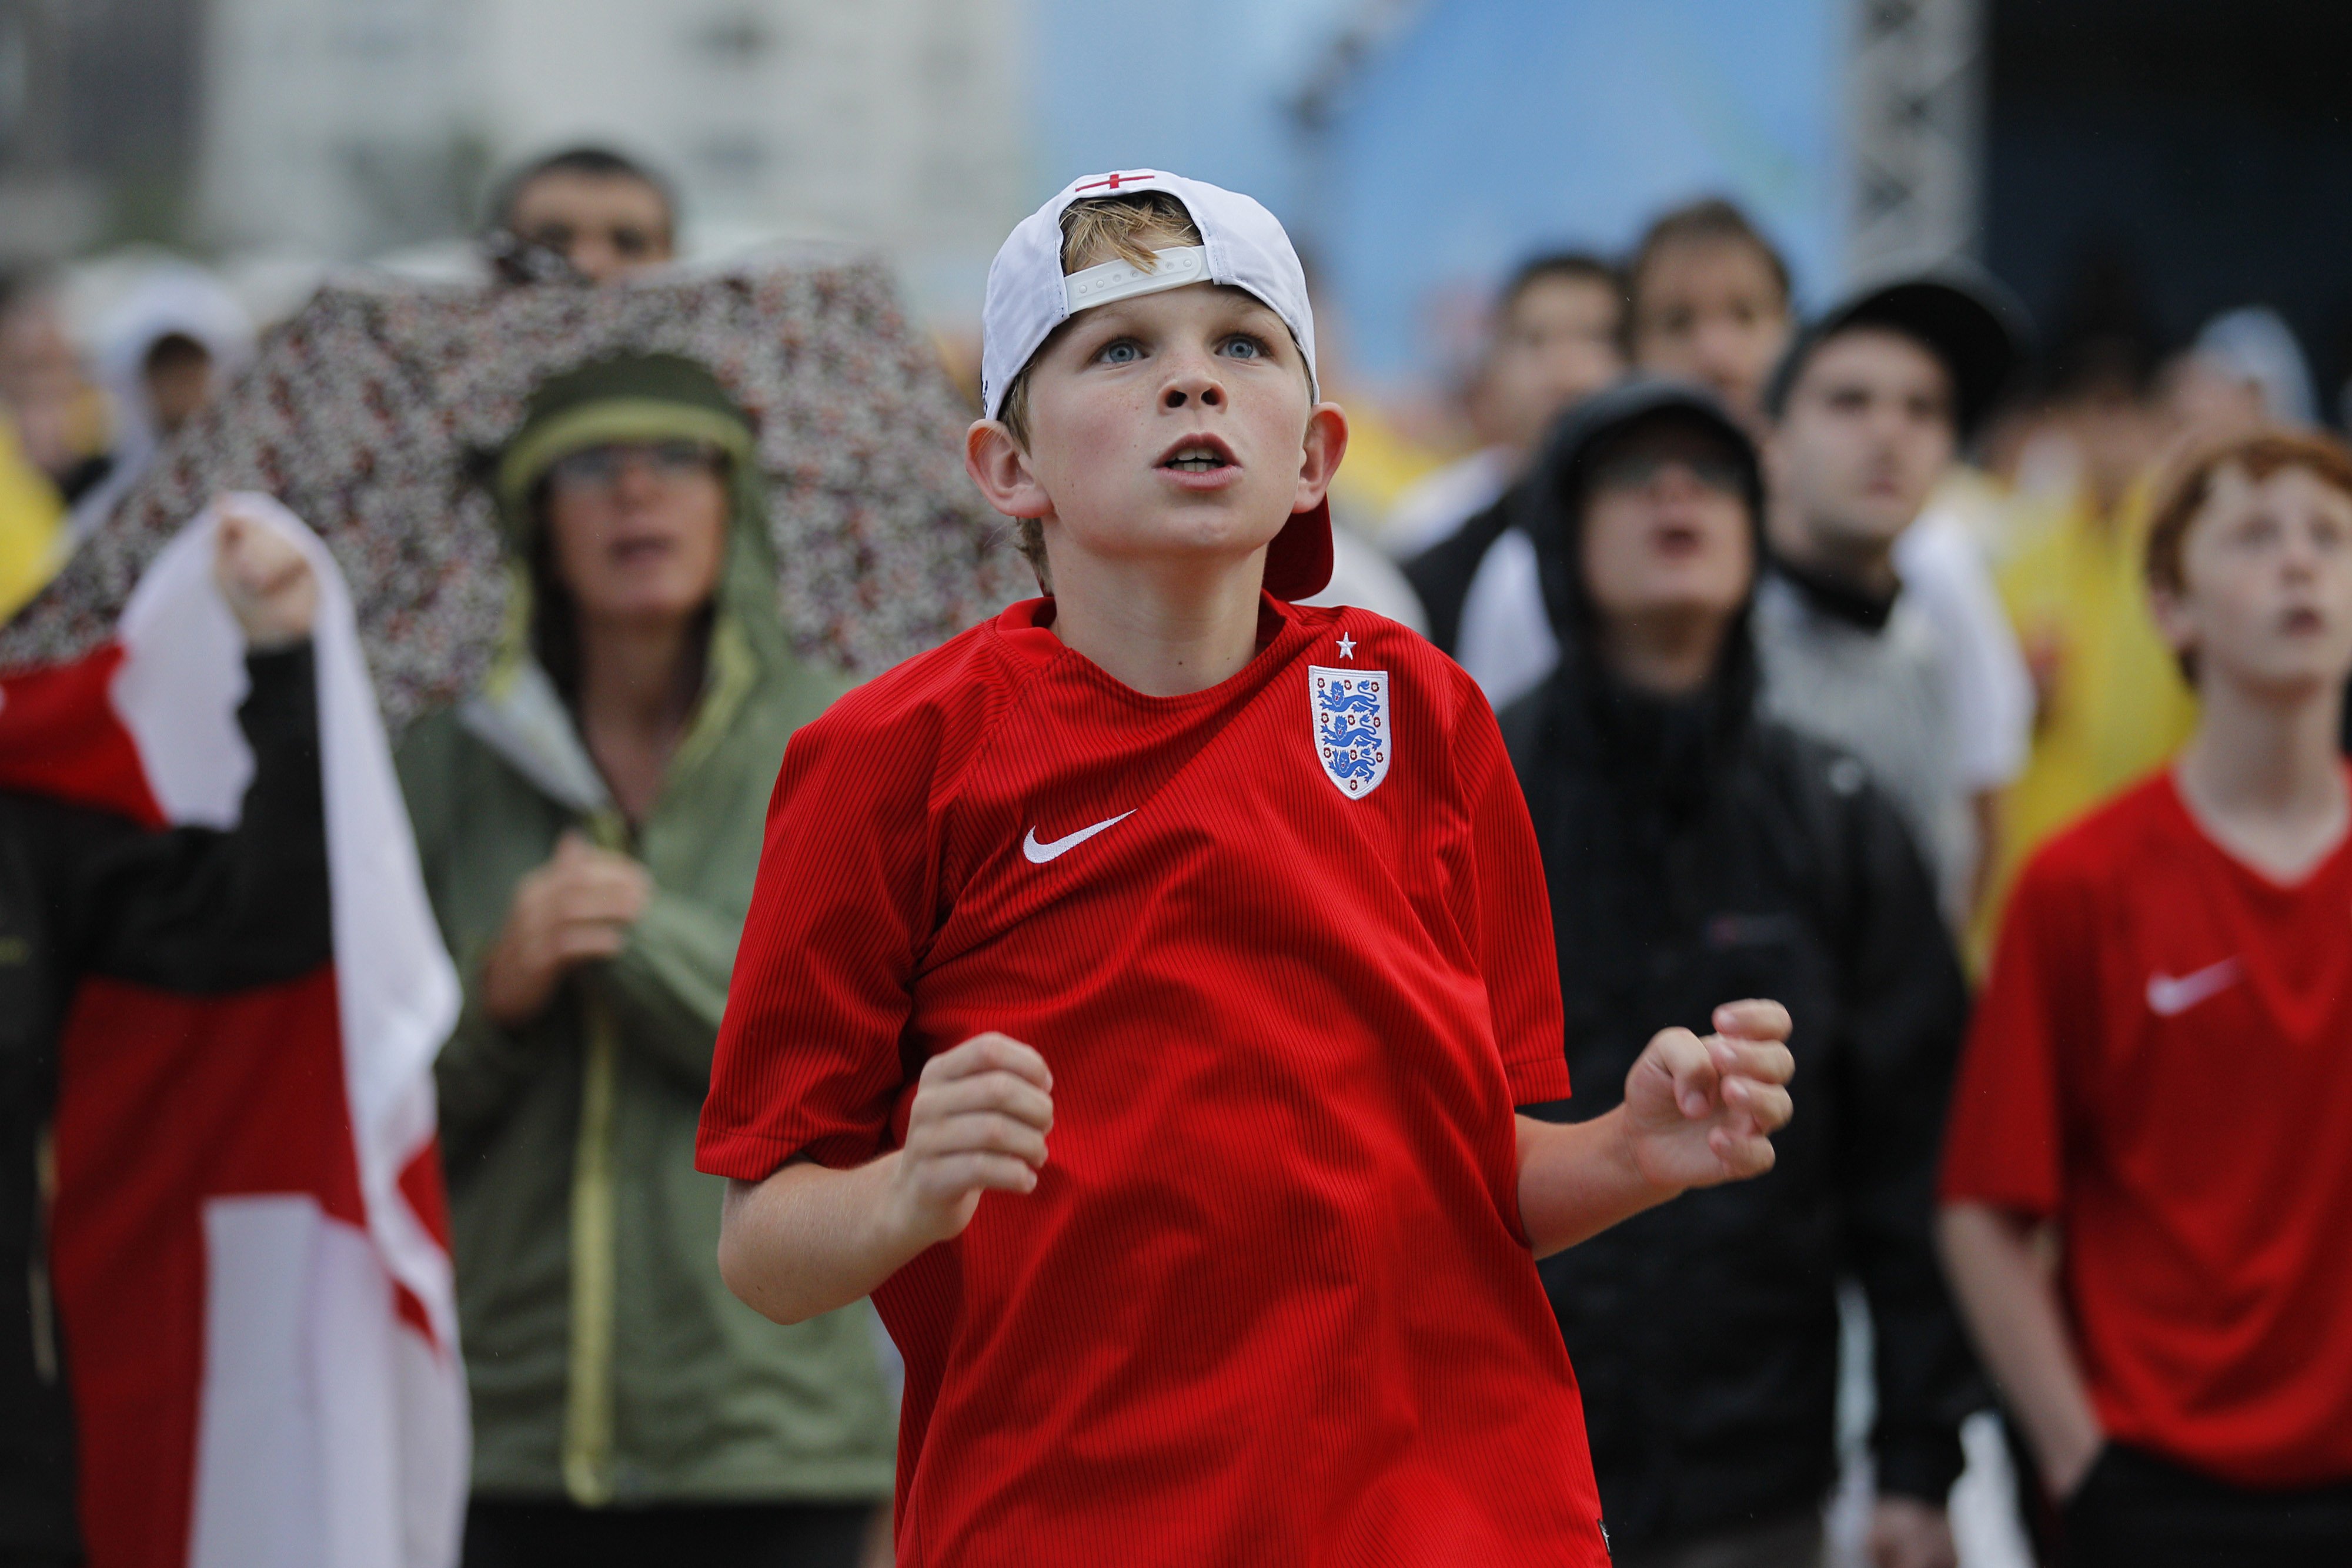 A young England fan watches a live telecast of the group D match between Uruguay and England, inside the FIFA Fan Fest area on Copacabana beach, in Rio de Janeiro on June 19, 2014.